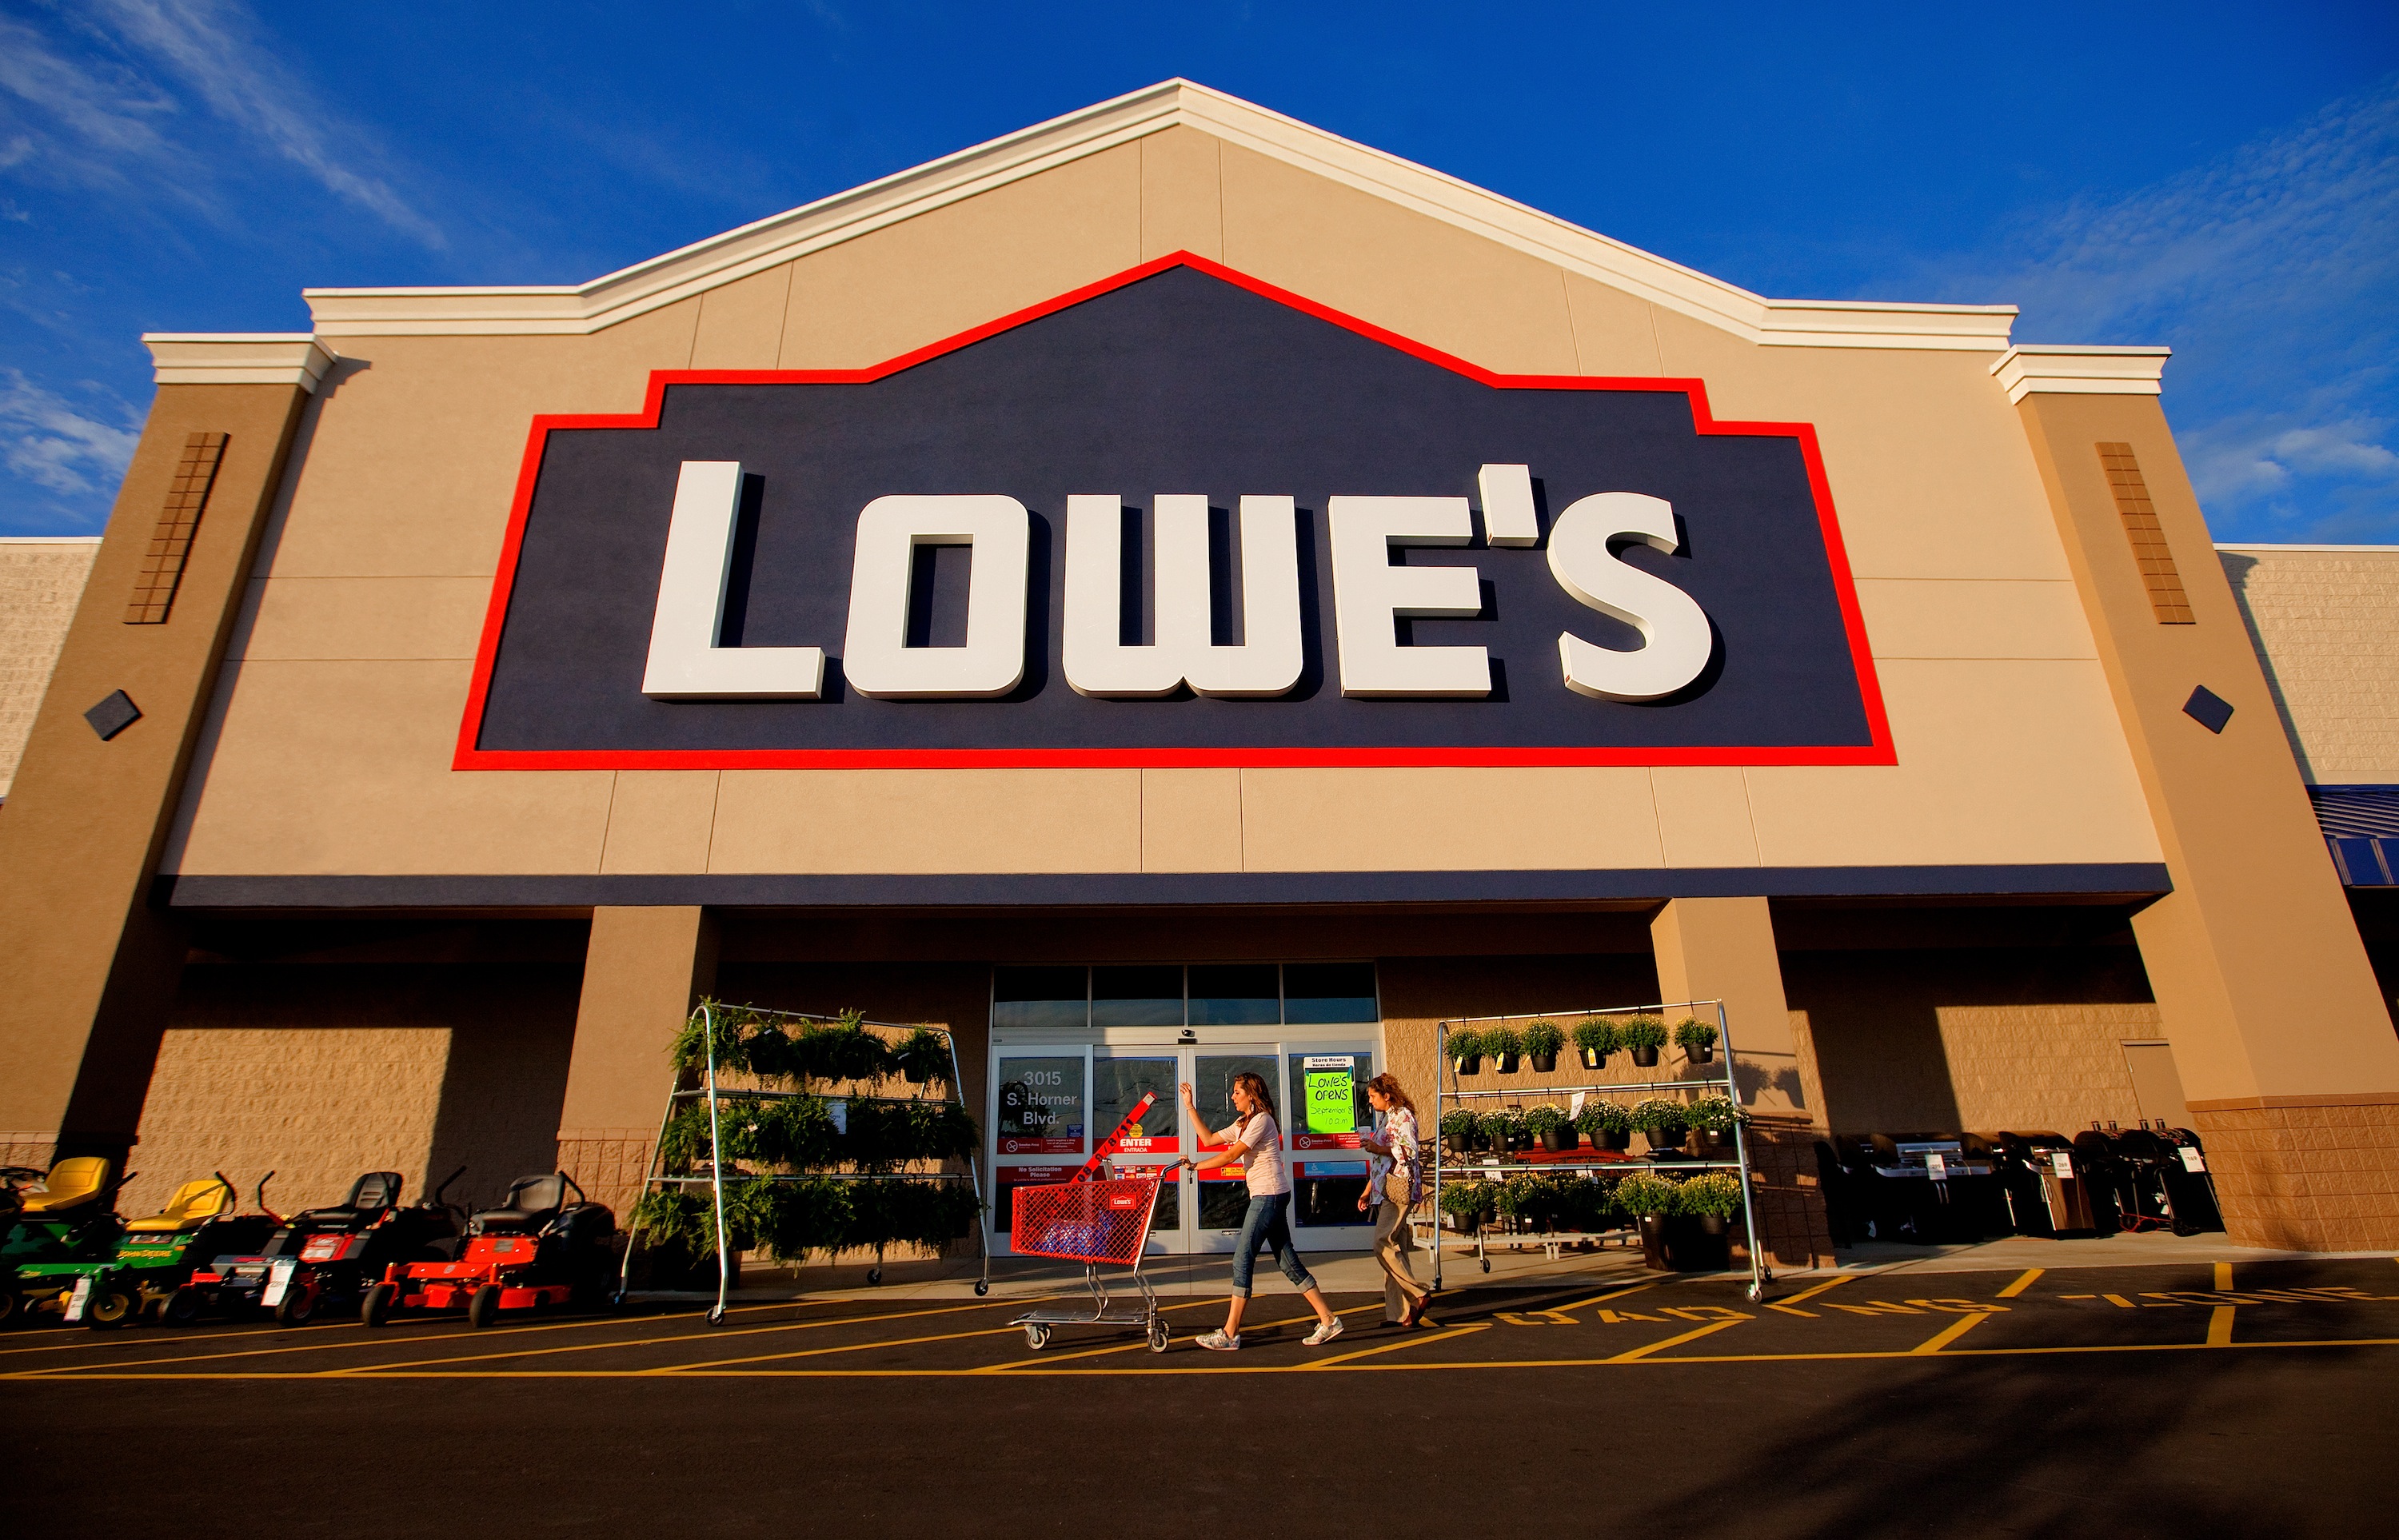 Lowe’s $150.00 Gift Card Only $135.00! Save on Home Projects, Tools for Father’s Day, Appliances and More!